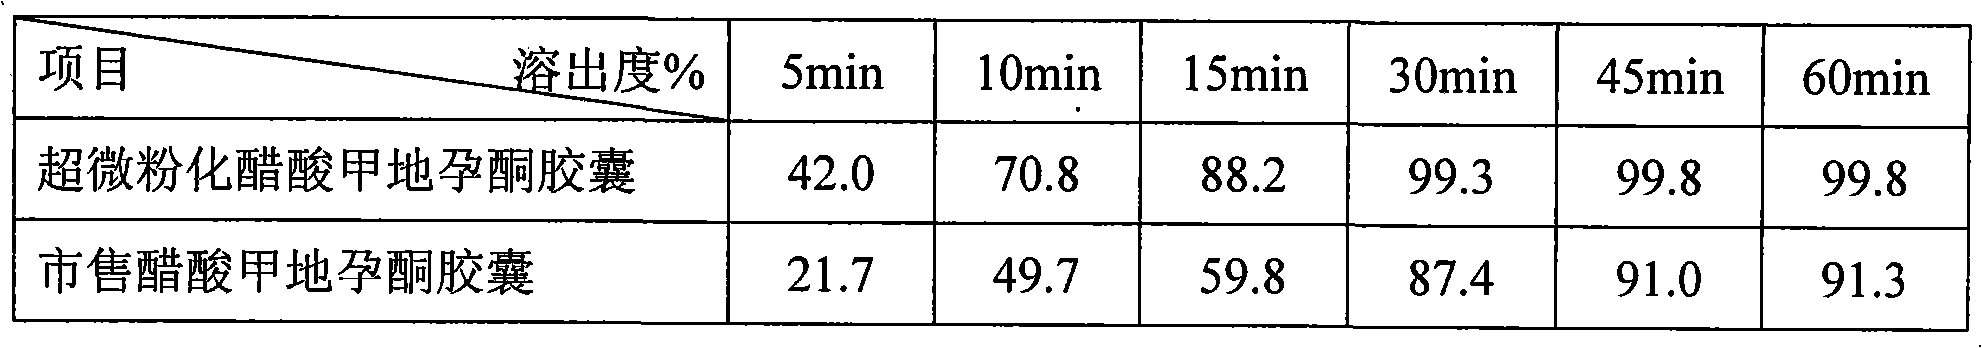 Ultra-micronized megestrol acetate and pharmaceutical composition containing same